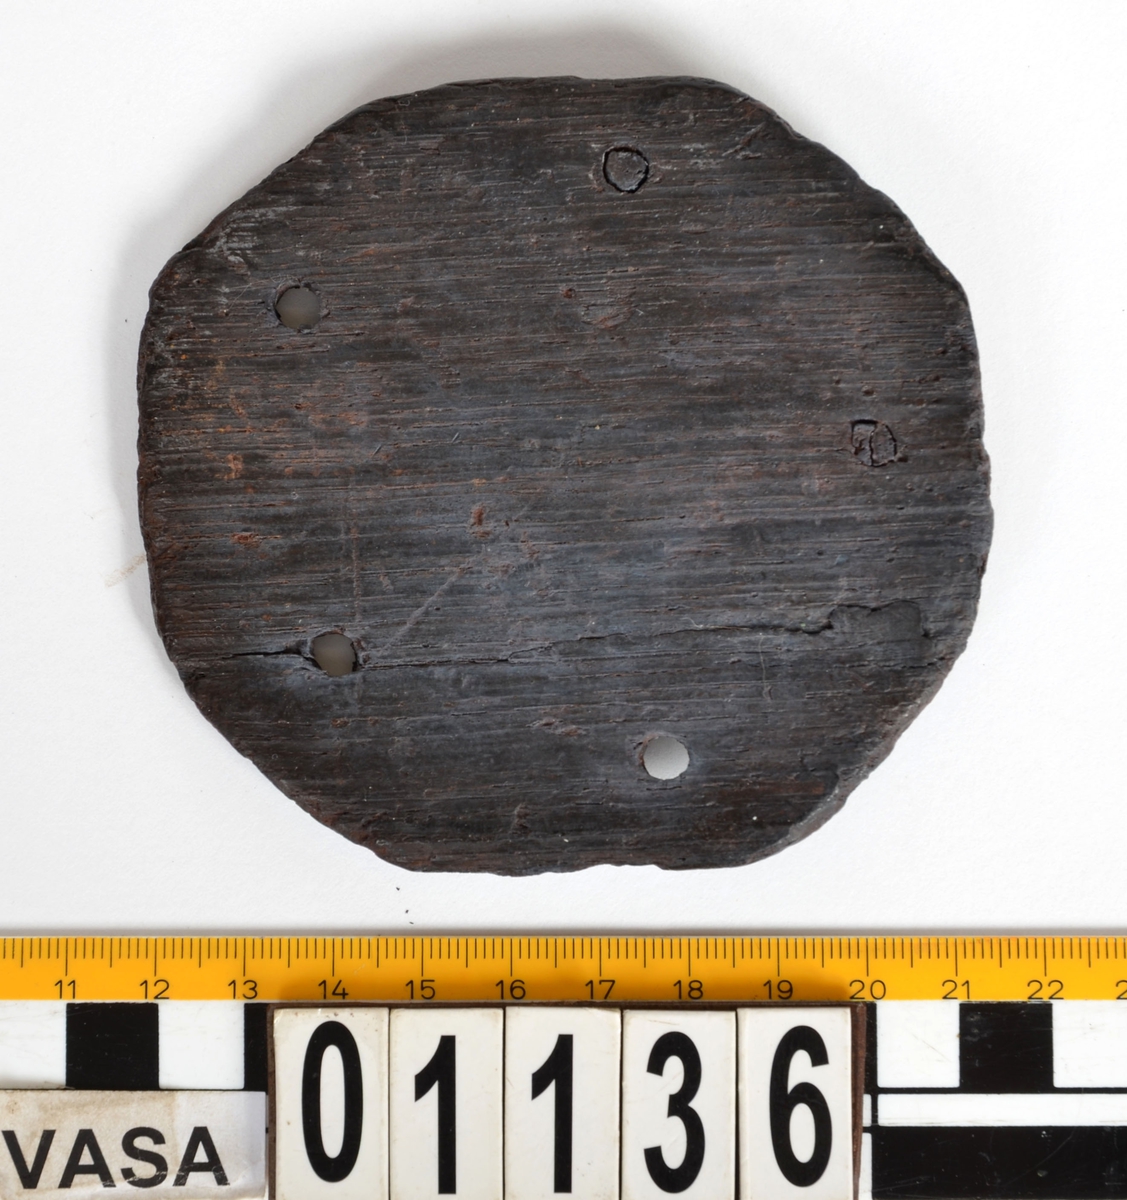 Platta till ett timglas. Åttasidig träplatta med fem genomgående hål runtom. Rest av pinne i ett hål.

Text in English: Eight-sided wooden plate identified  as the end cap for a sand glass (hourglass), the most common type of time-keeping device on board ships until the 19th century. The size is correct for a half-hour glass, which was used to time the watches and the length of a man?s ?trick? as steersman before he was relieved. Vasa carried at least two sandglasses, but probably many more, since they were easily broken.